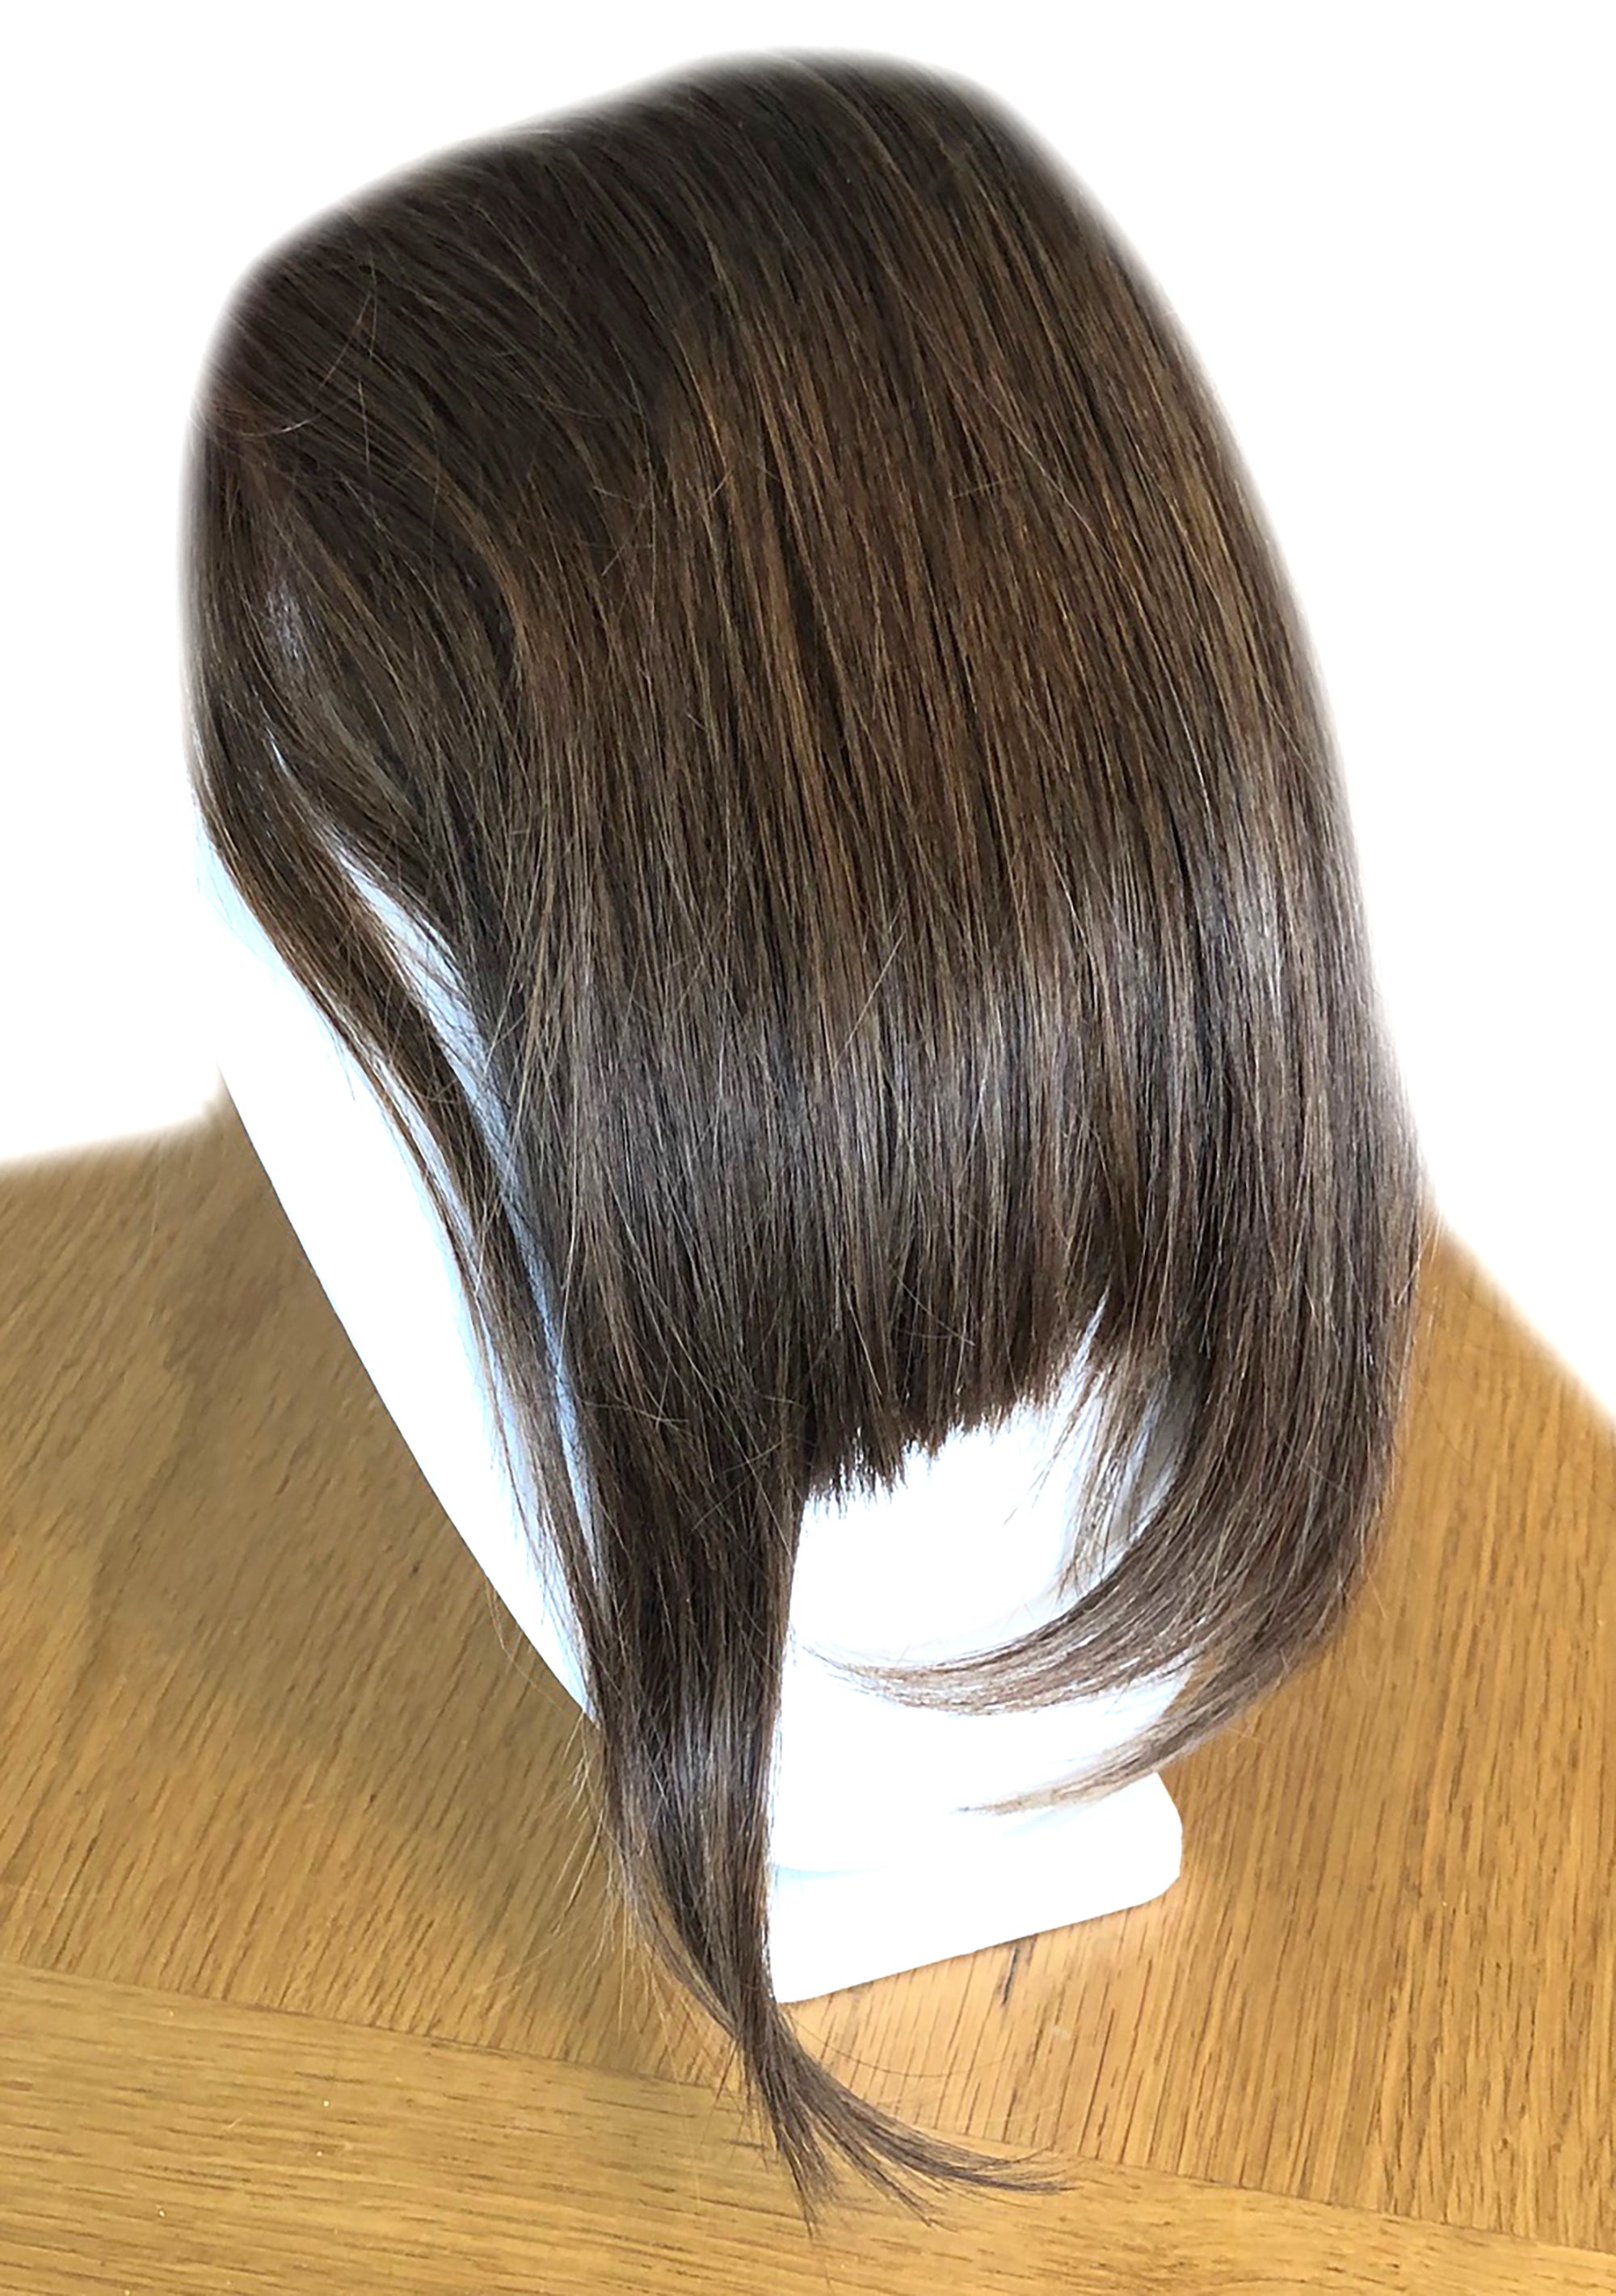 Clip in bangs hair extension mini wig 100% real human (Light brown)